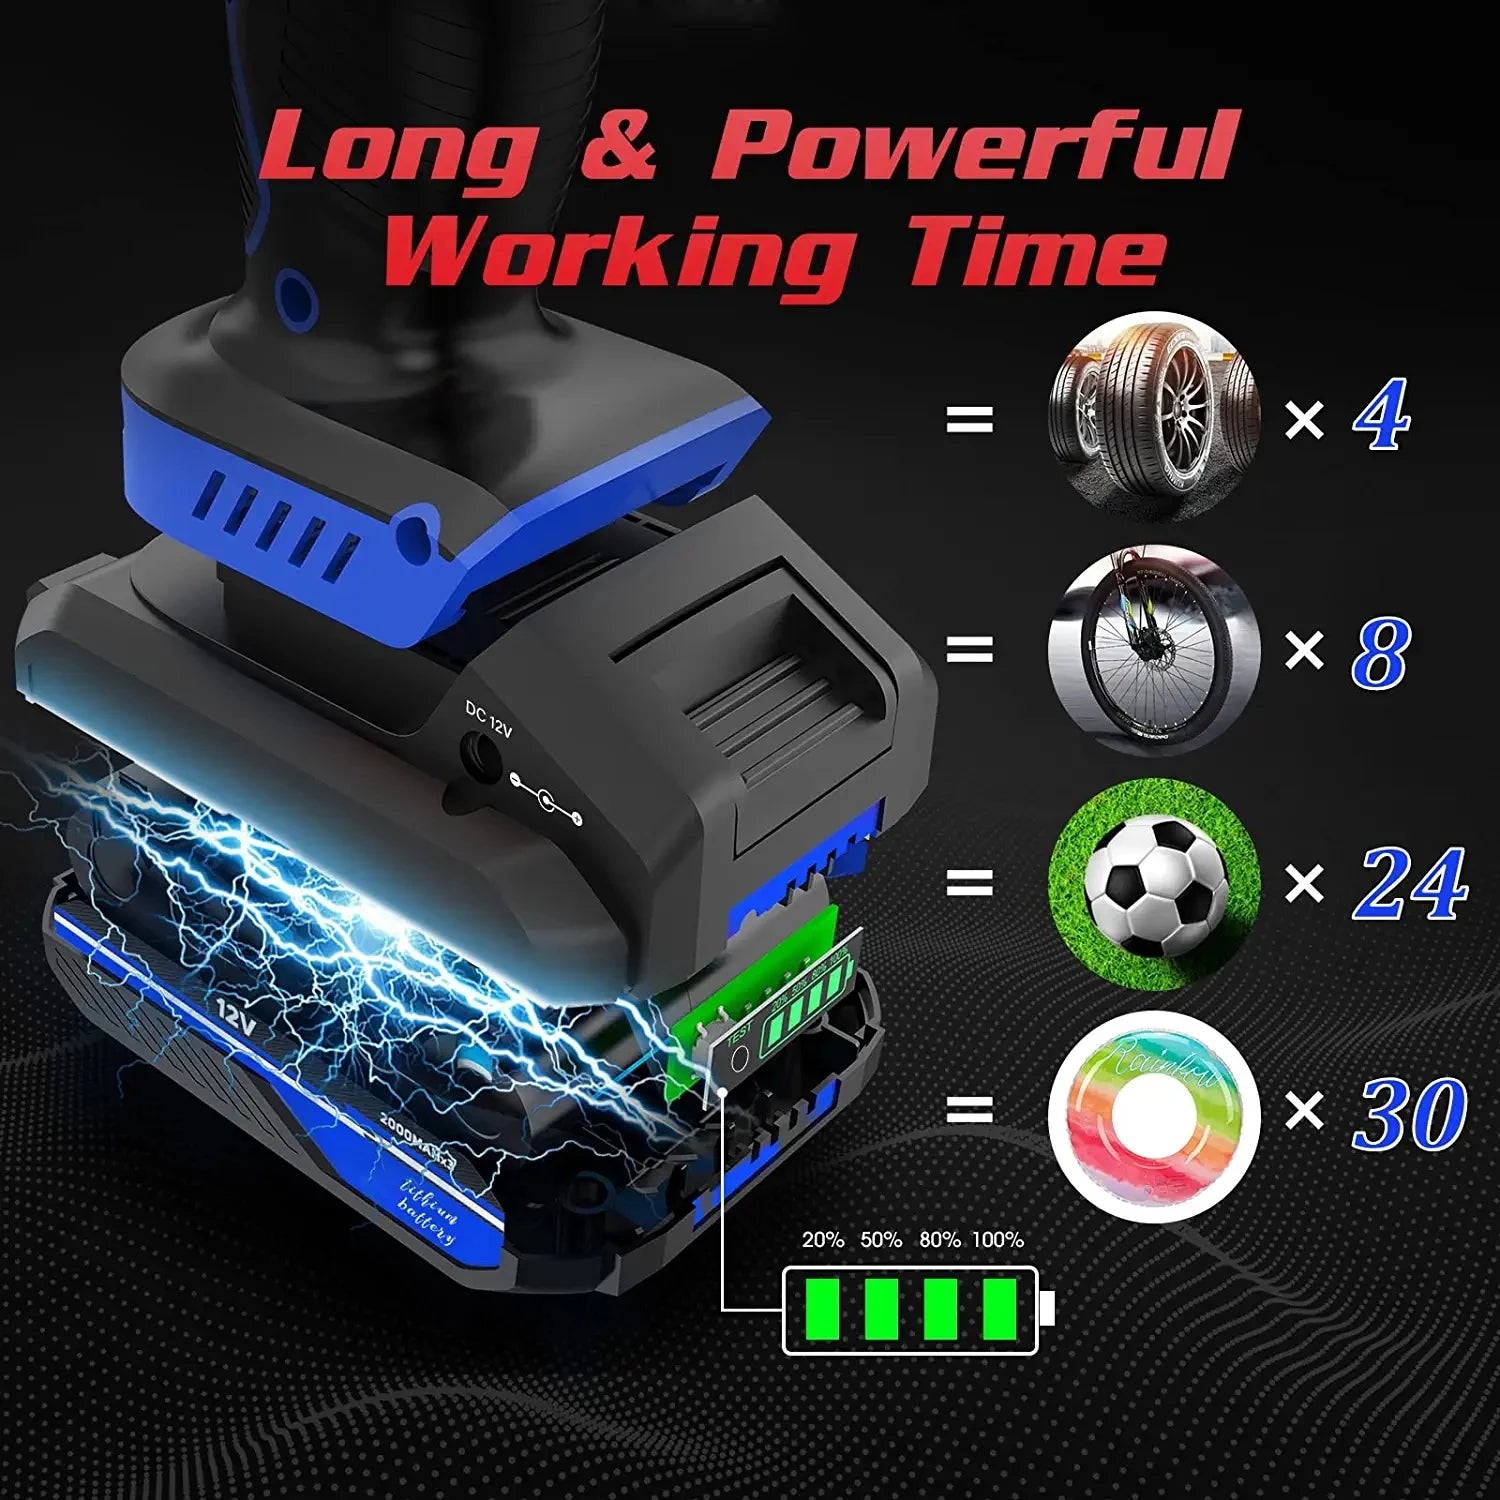 2000mAh x3 Battery Air Compressor Handheld 12V Electric Air Pump For Car Motorcycle Bicycles Red Travel Portable Tire Inflator